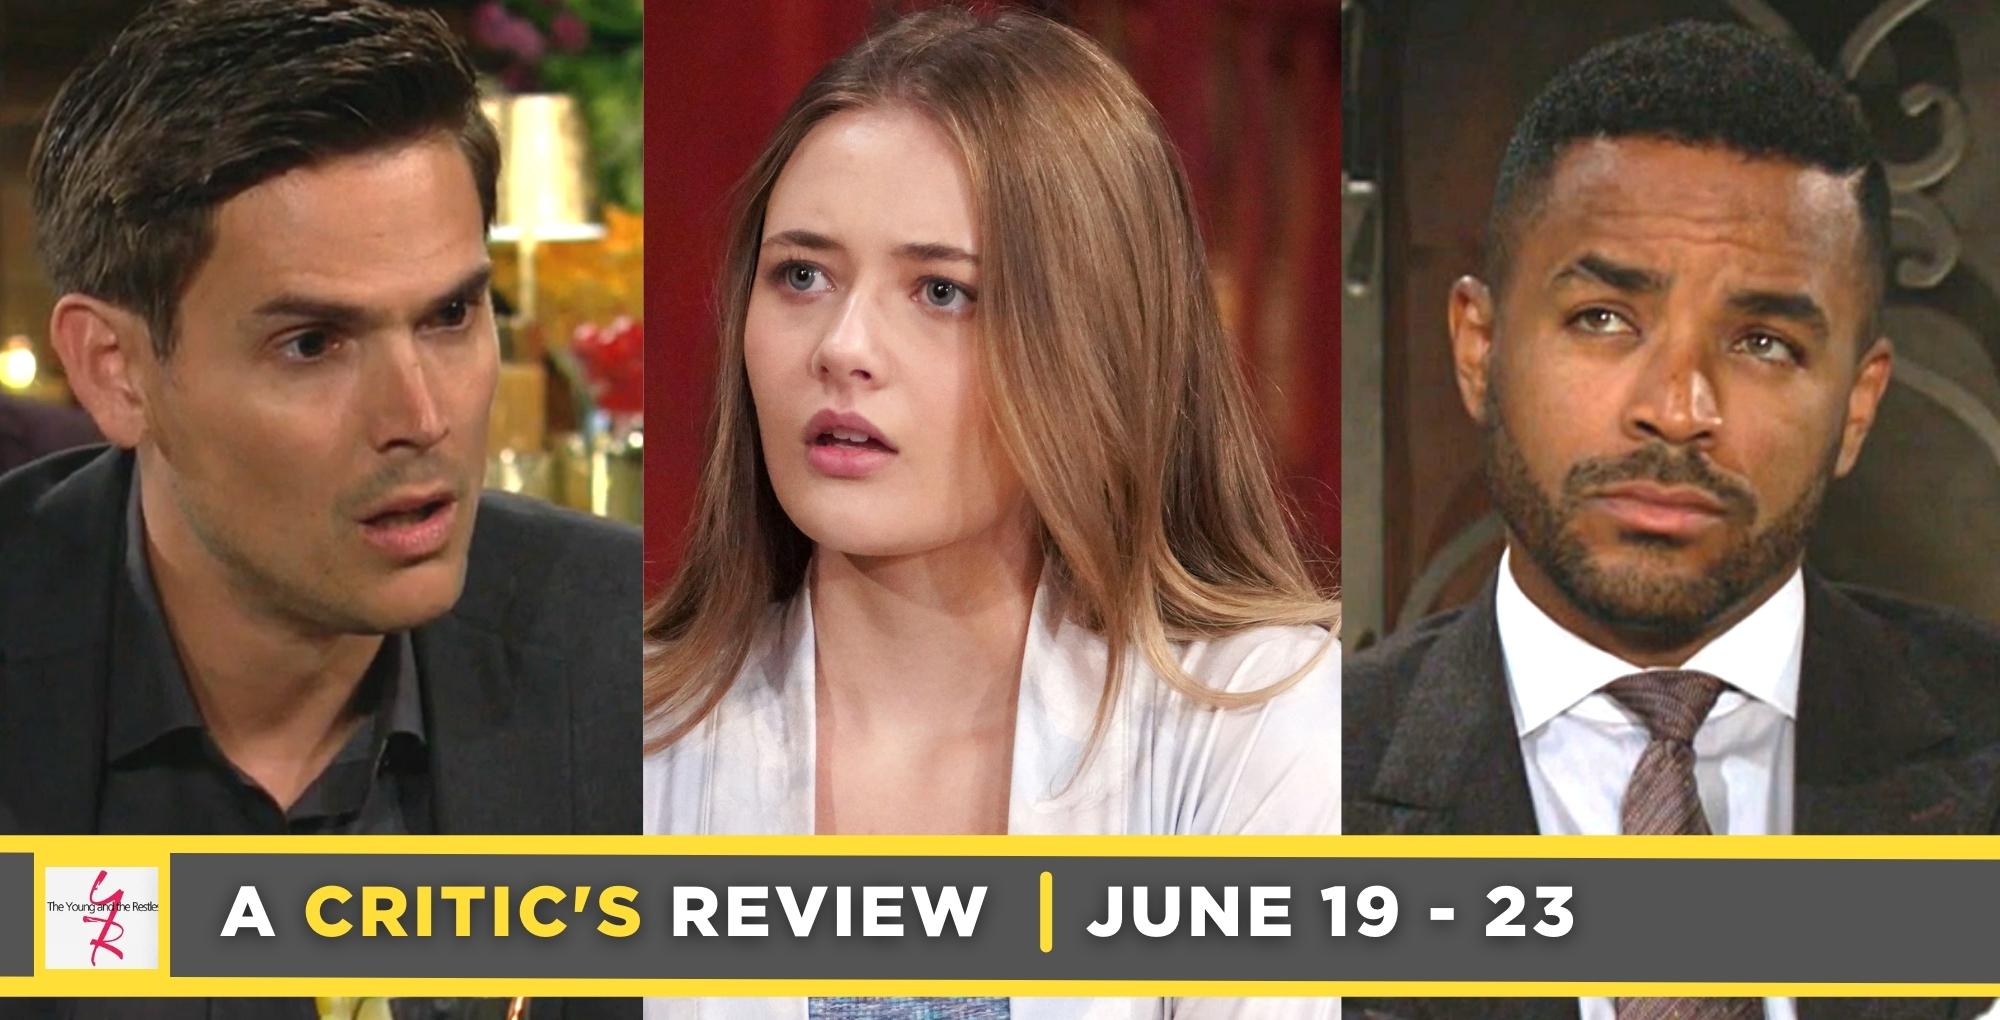 the young and the restless critic's review for june 19 – june 23, 2023, three images adam, faith, and nate.